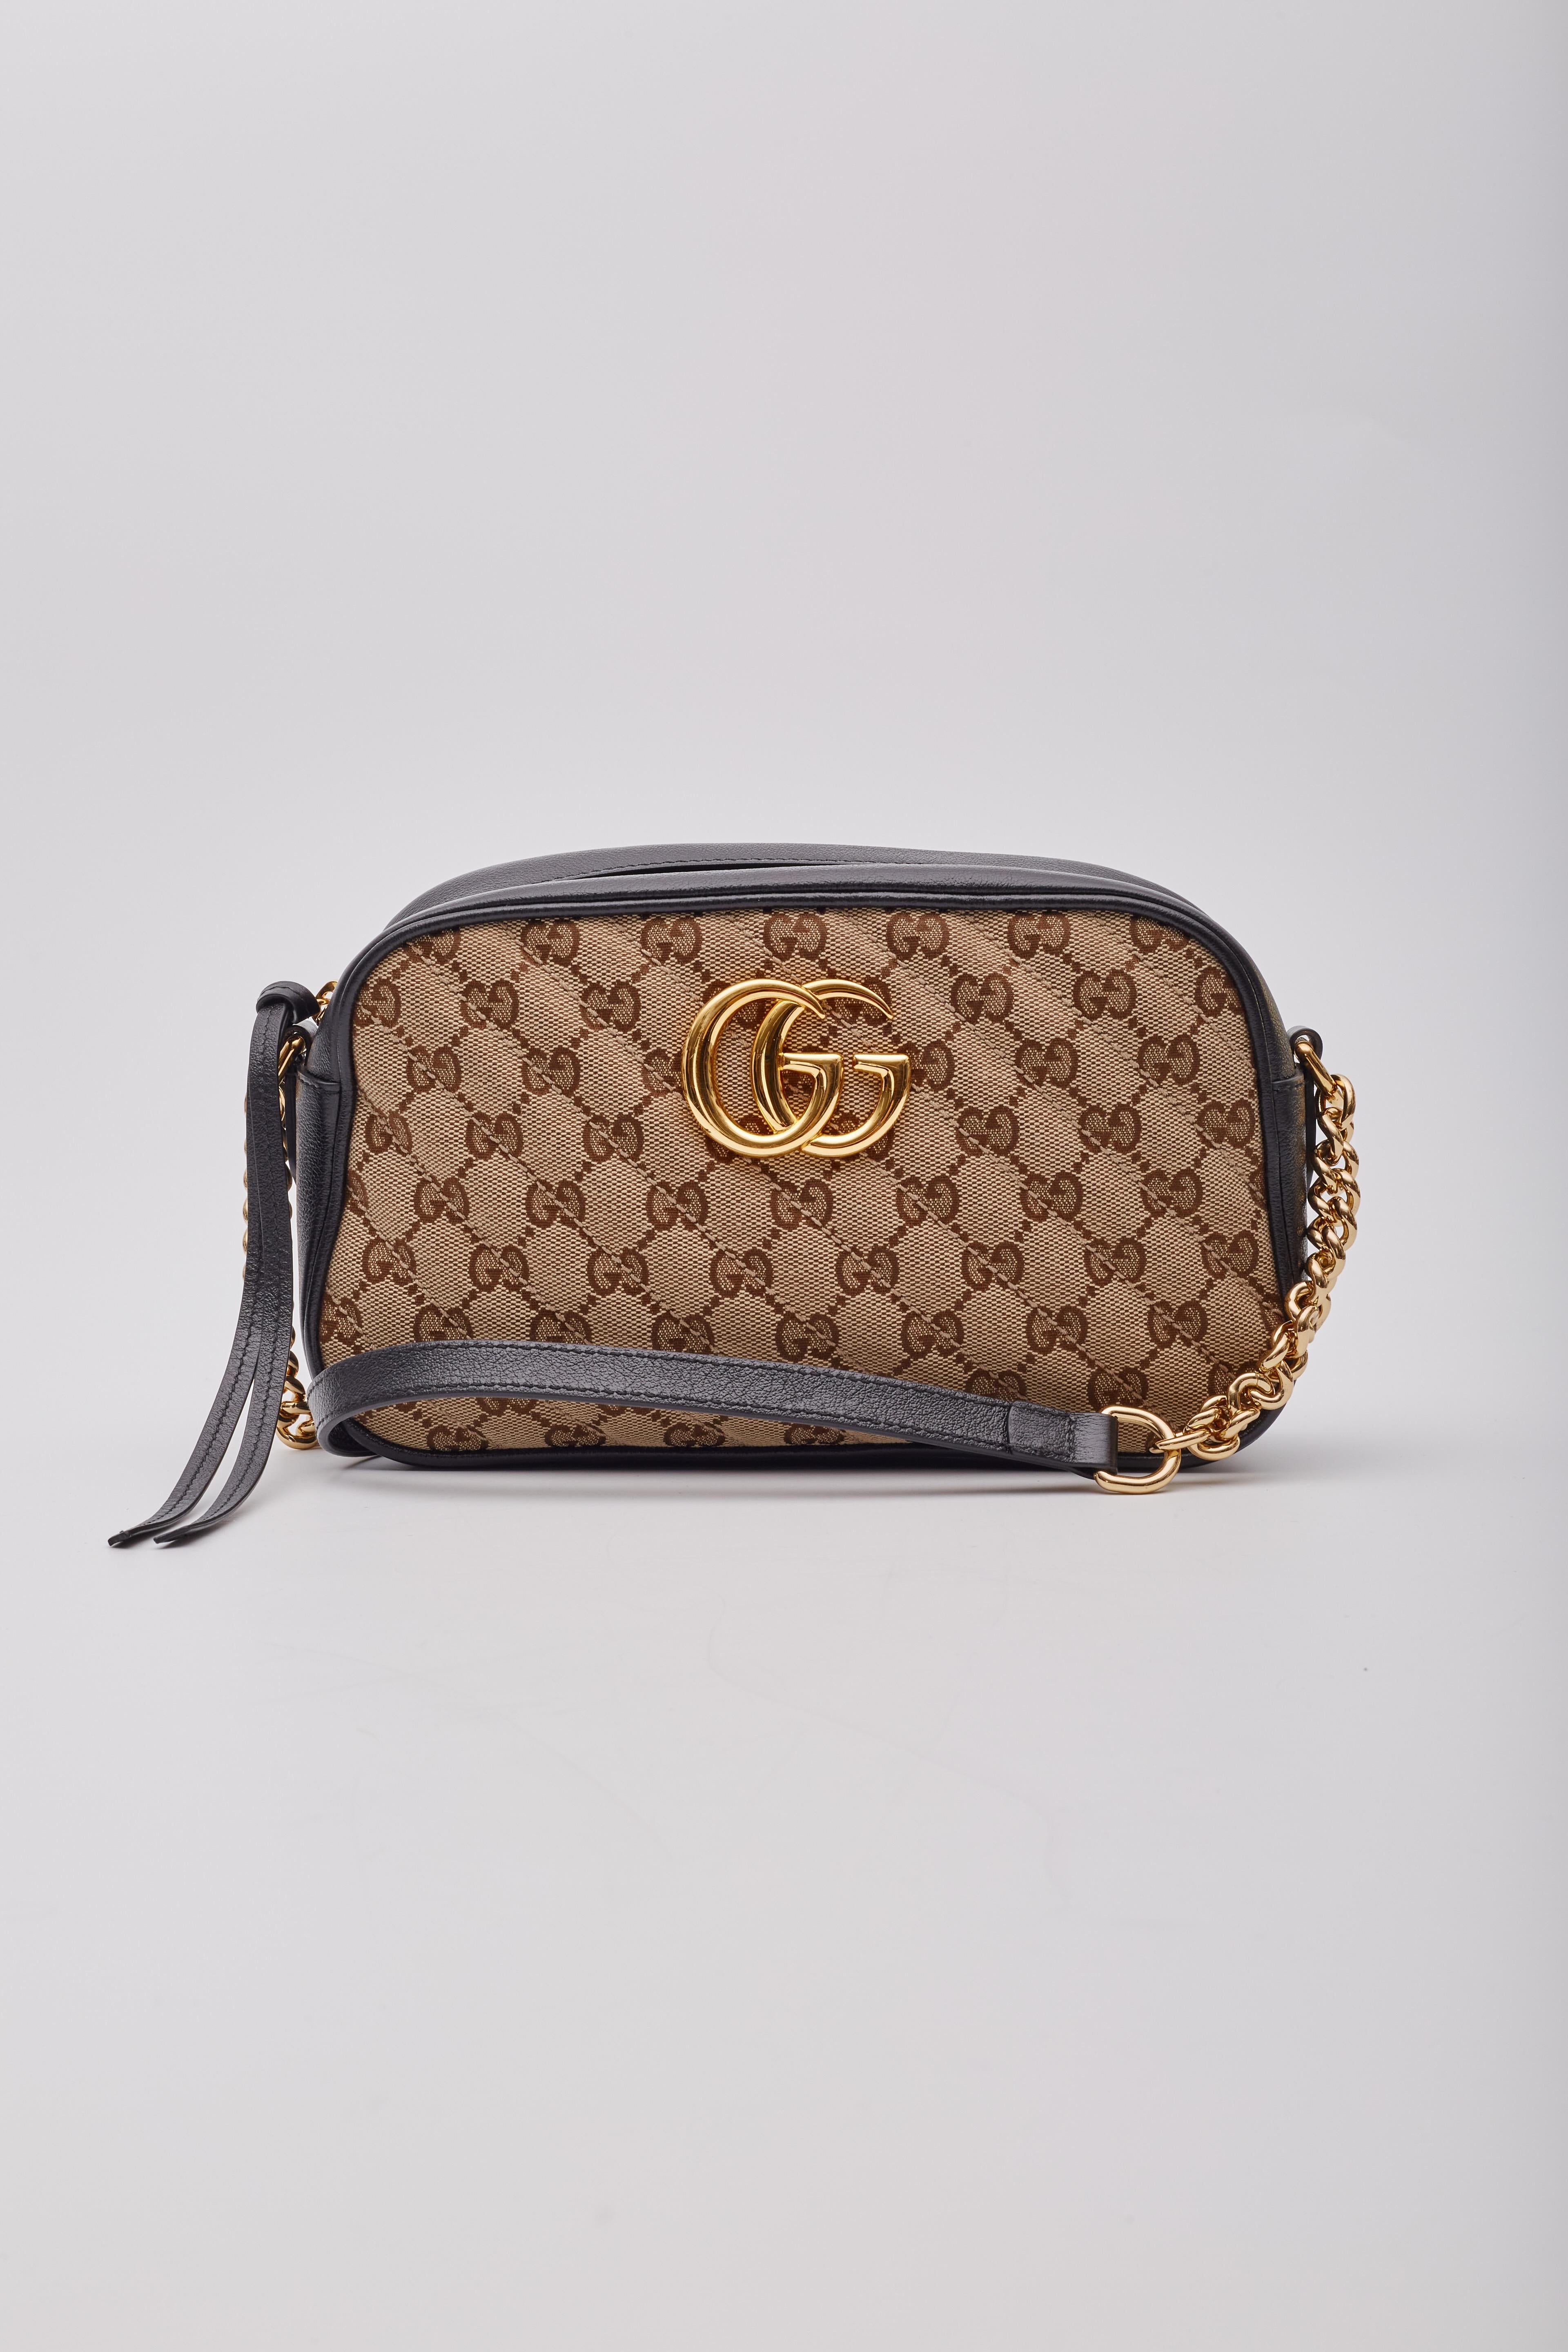 Gucci Monogram Small GG Marmont Shoulder Bag Beige Black In Excellent Condition For Sale In Montreal, Quebec